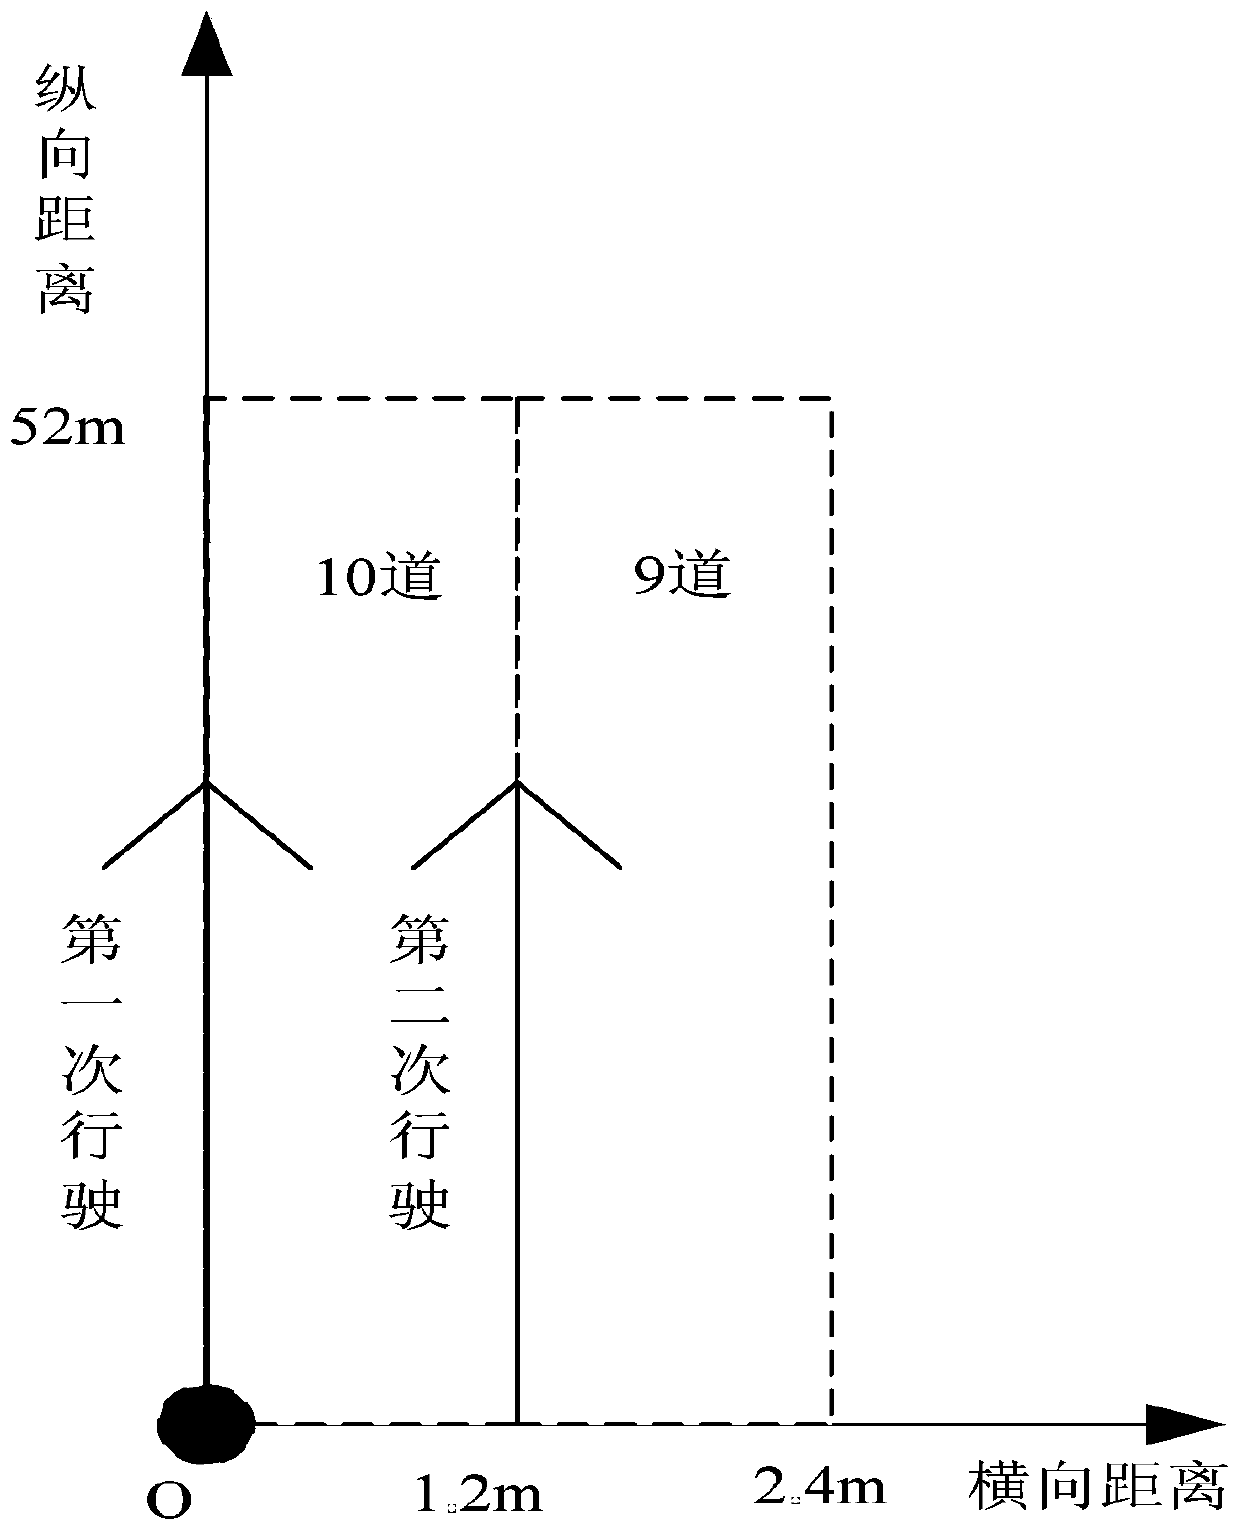 Paving operation speed measuring method for paver